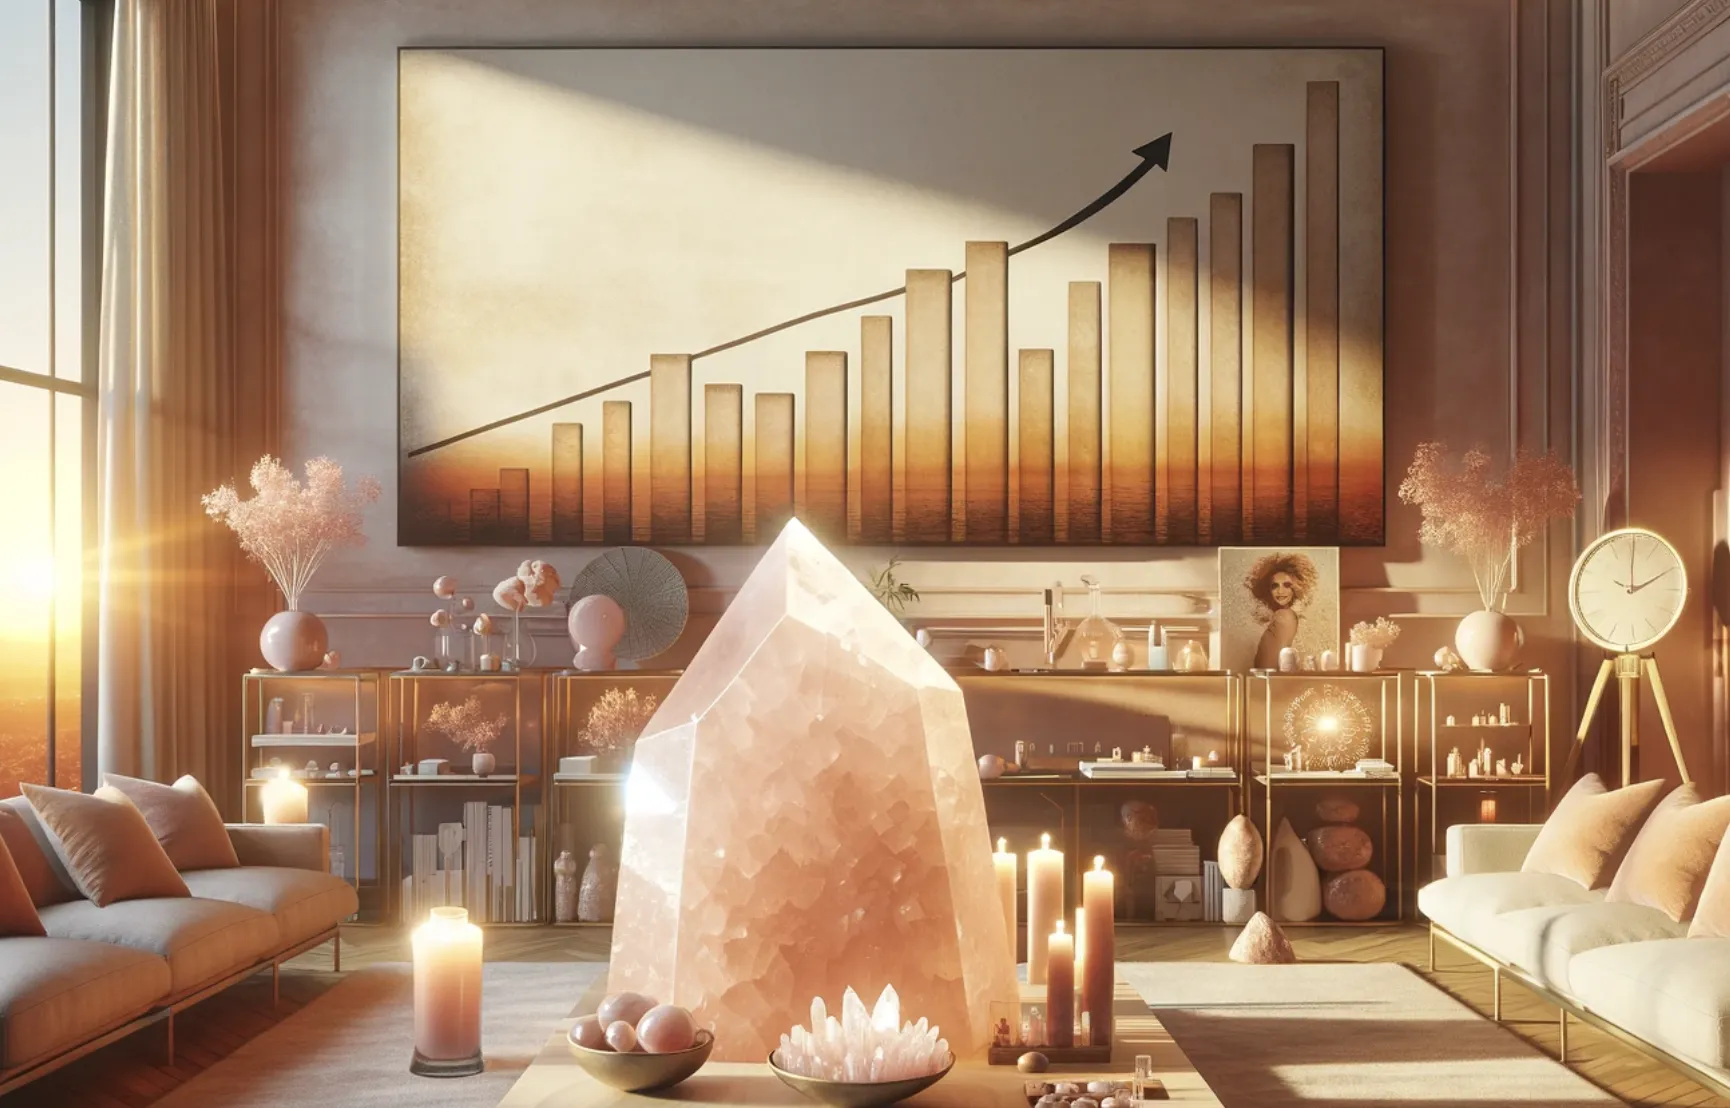 large rose quartz crystal with a graph rising in the background